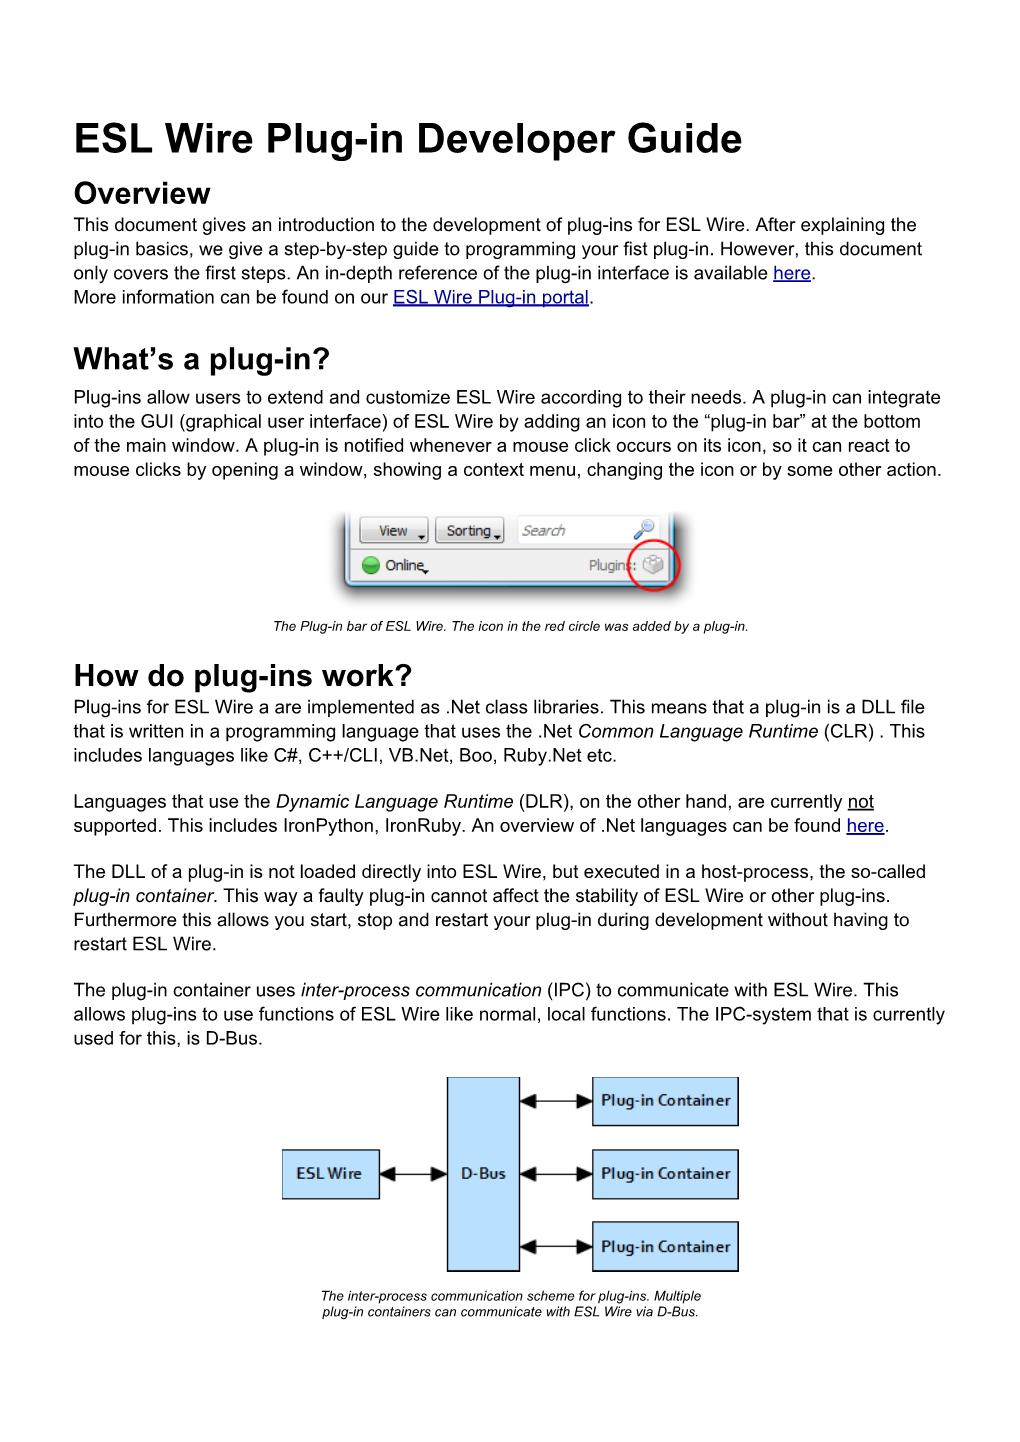 ESL Wire Plug-In Developer Guide Overview This Document Gives an Introduction to the Development of Plug-Ins for ESL Wire